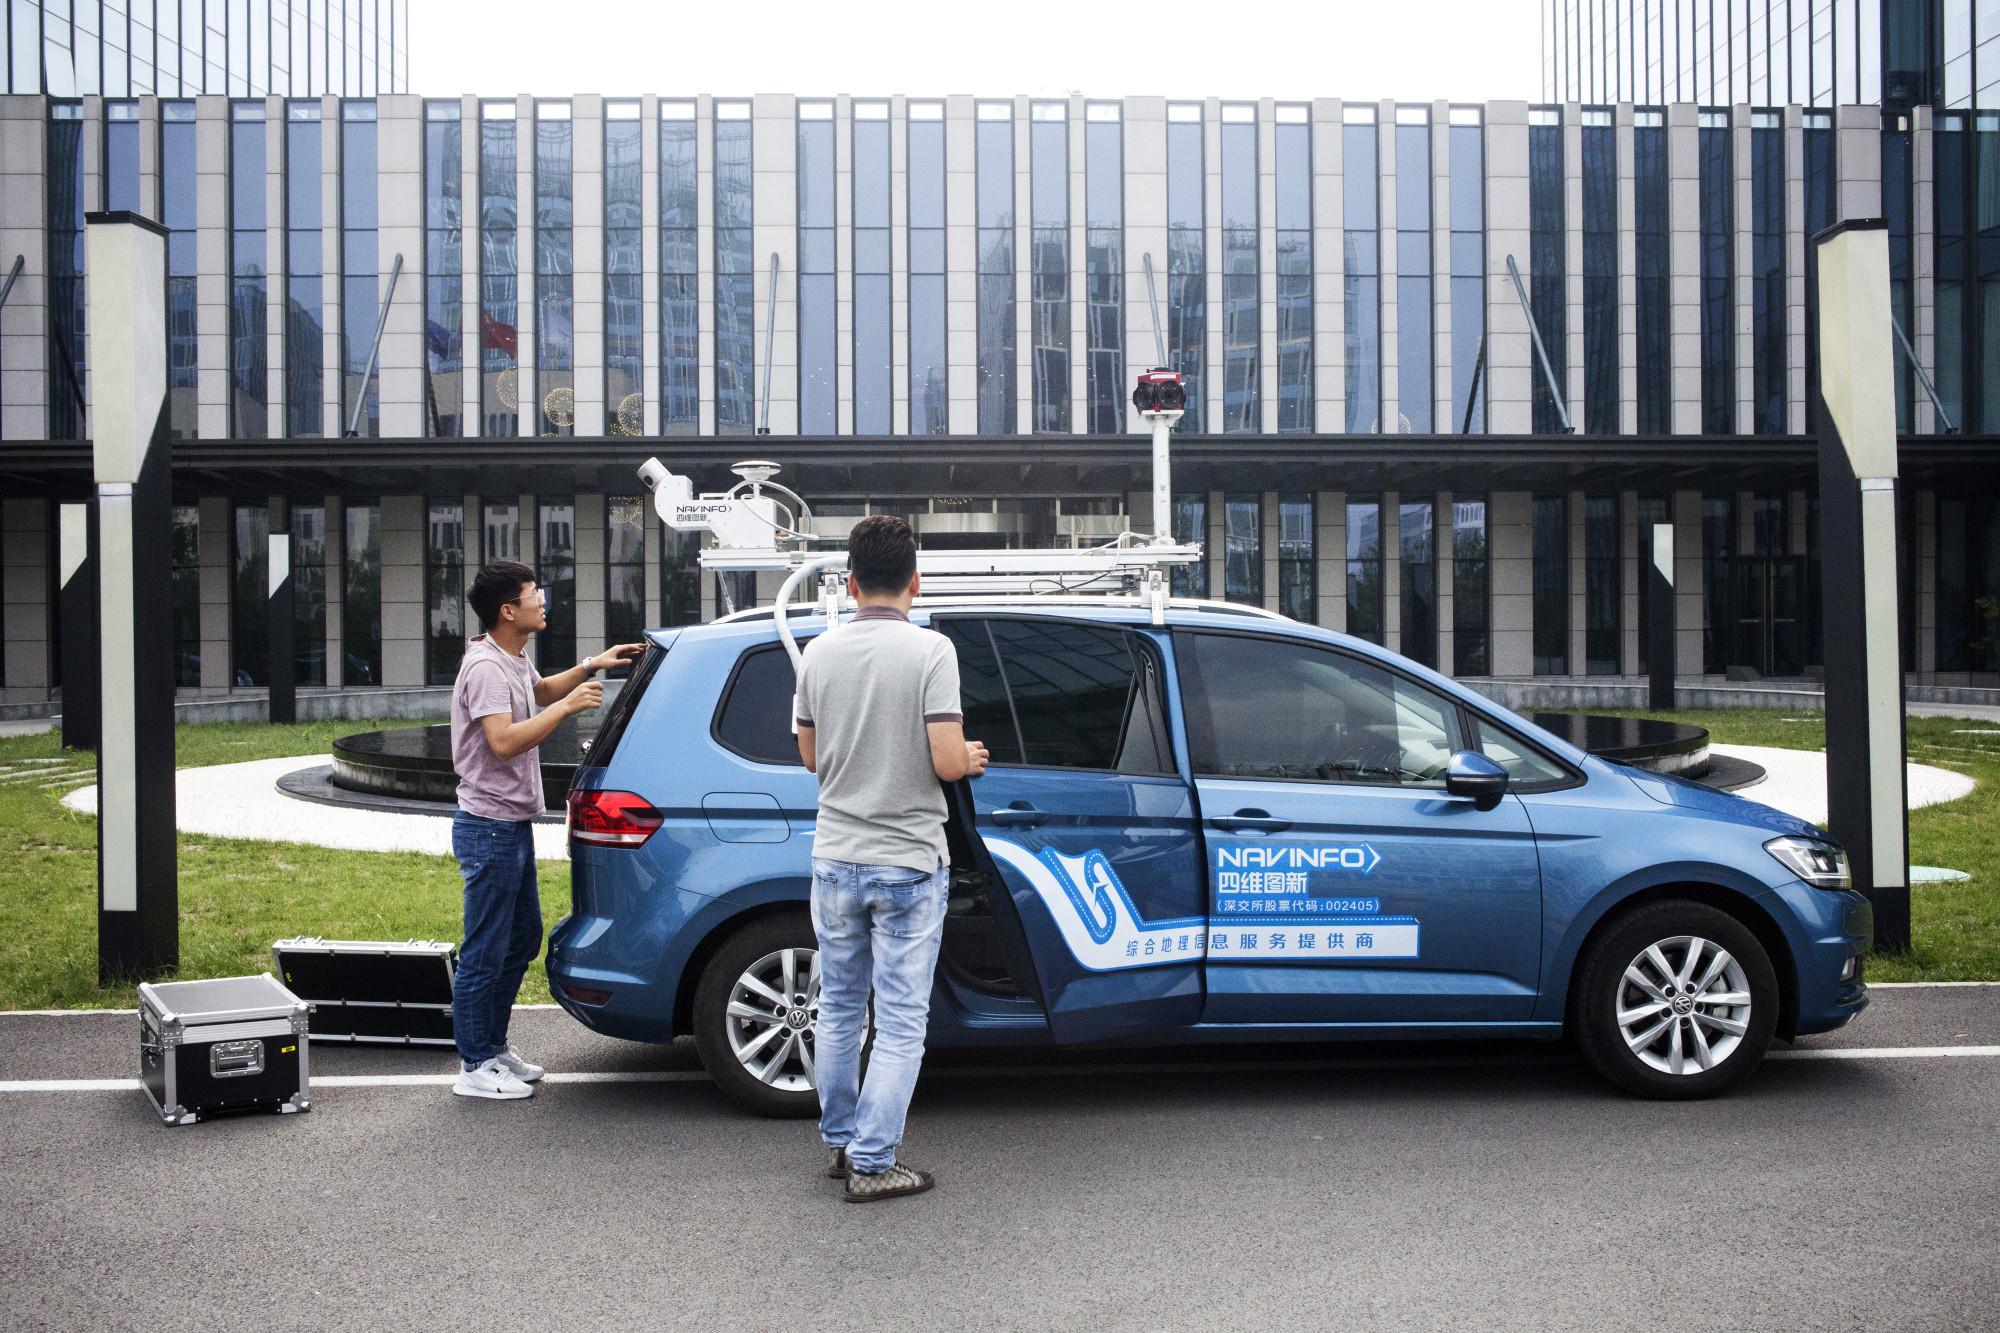 Employees prepare a NavInfo vehicle for data collection in Beijing&nbsp;on&nbsp;June 11.